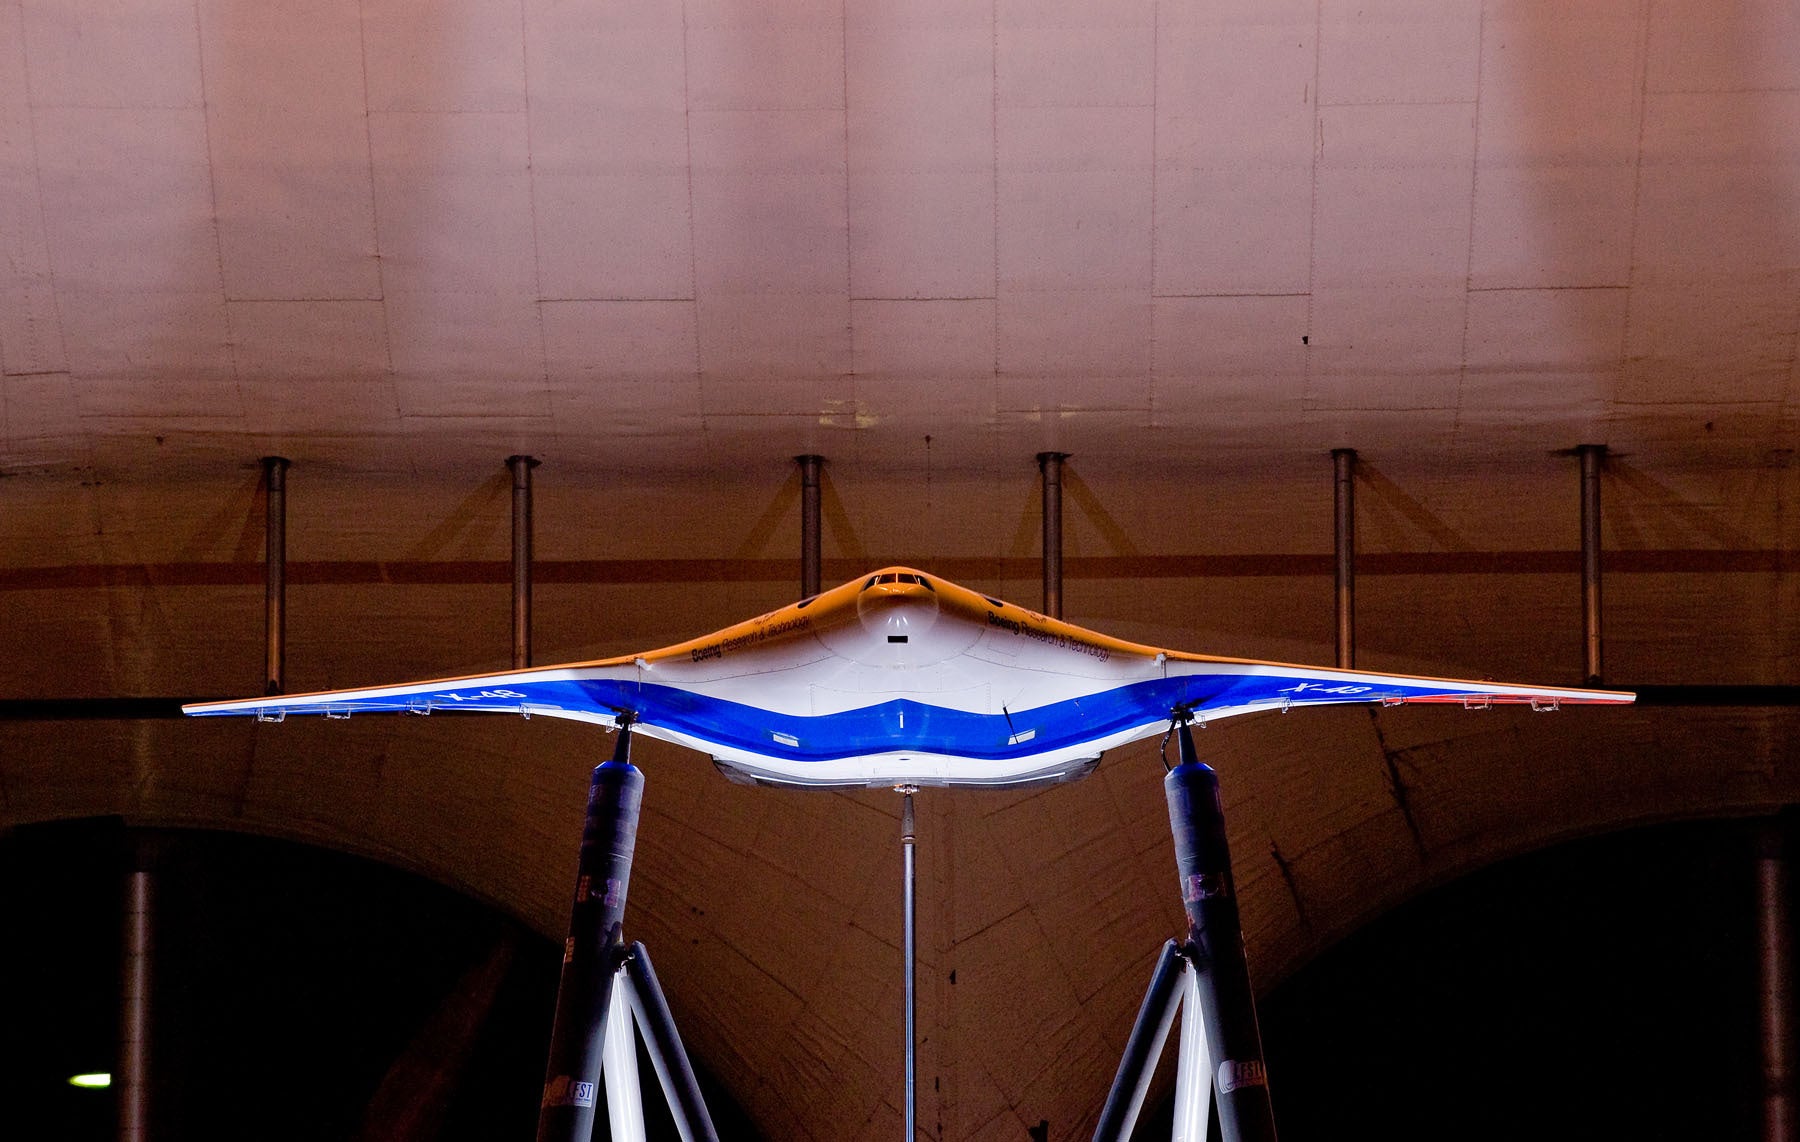 X-48B Blended Wing Body at Langley Wind Tunnel BI231519